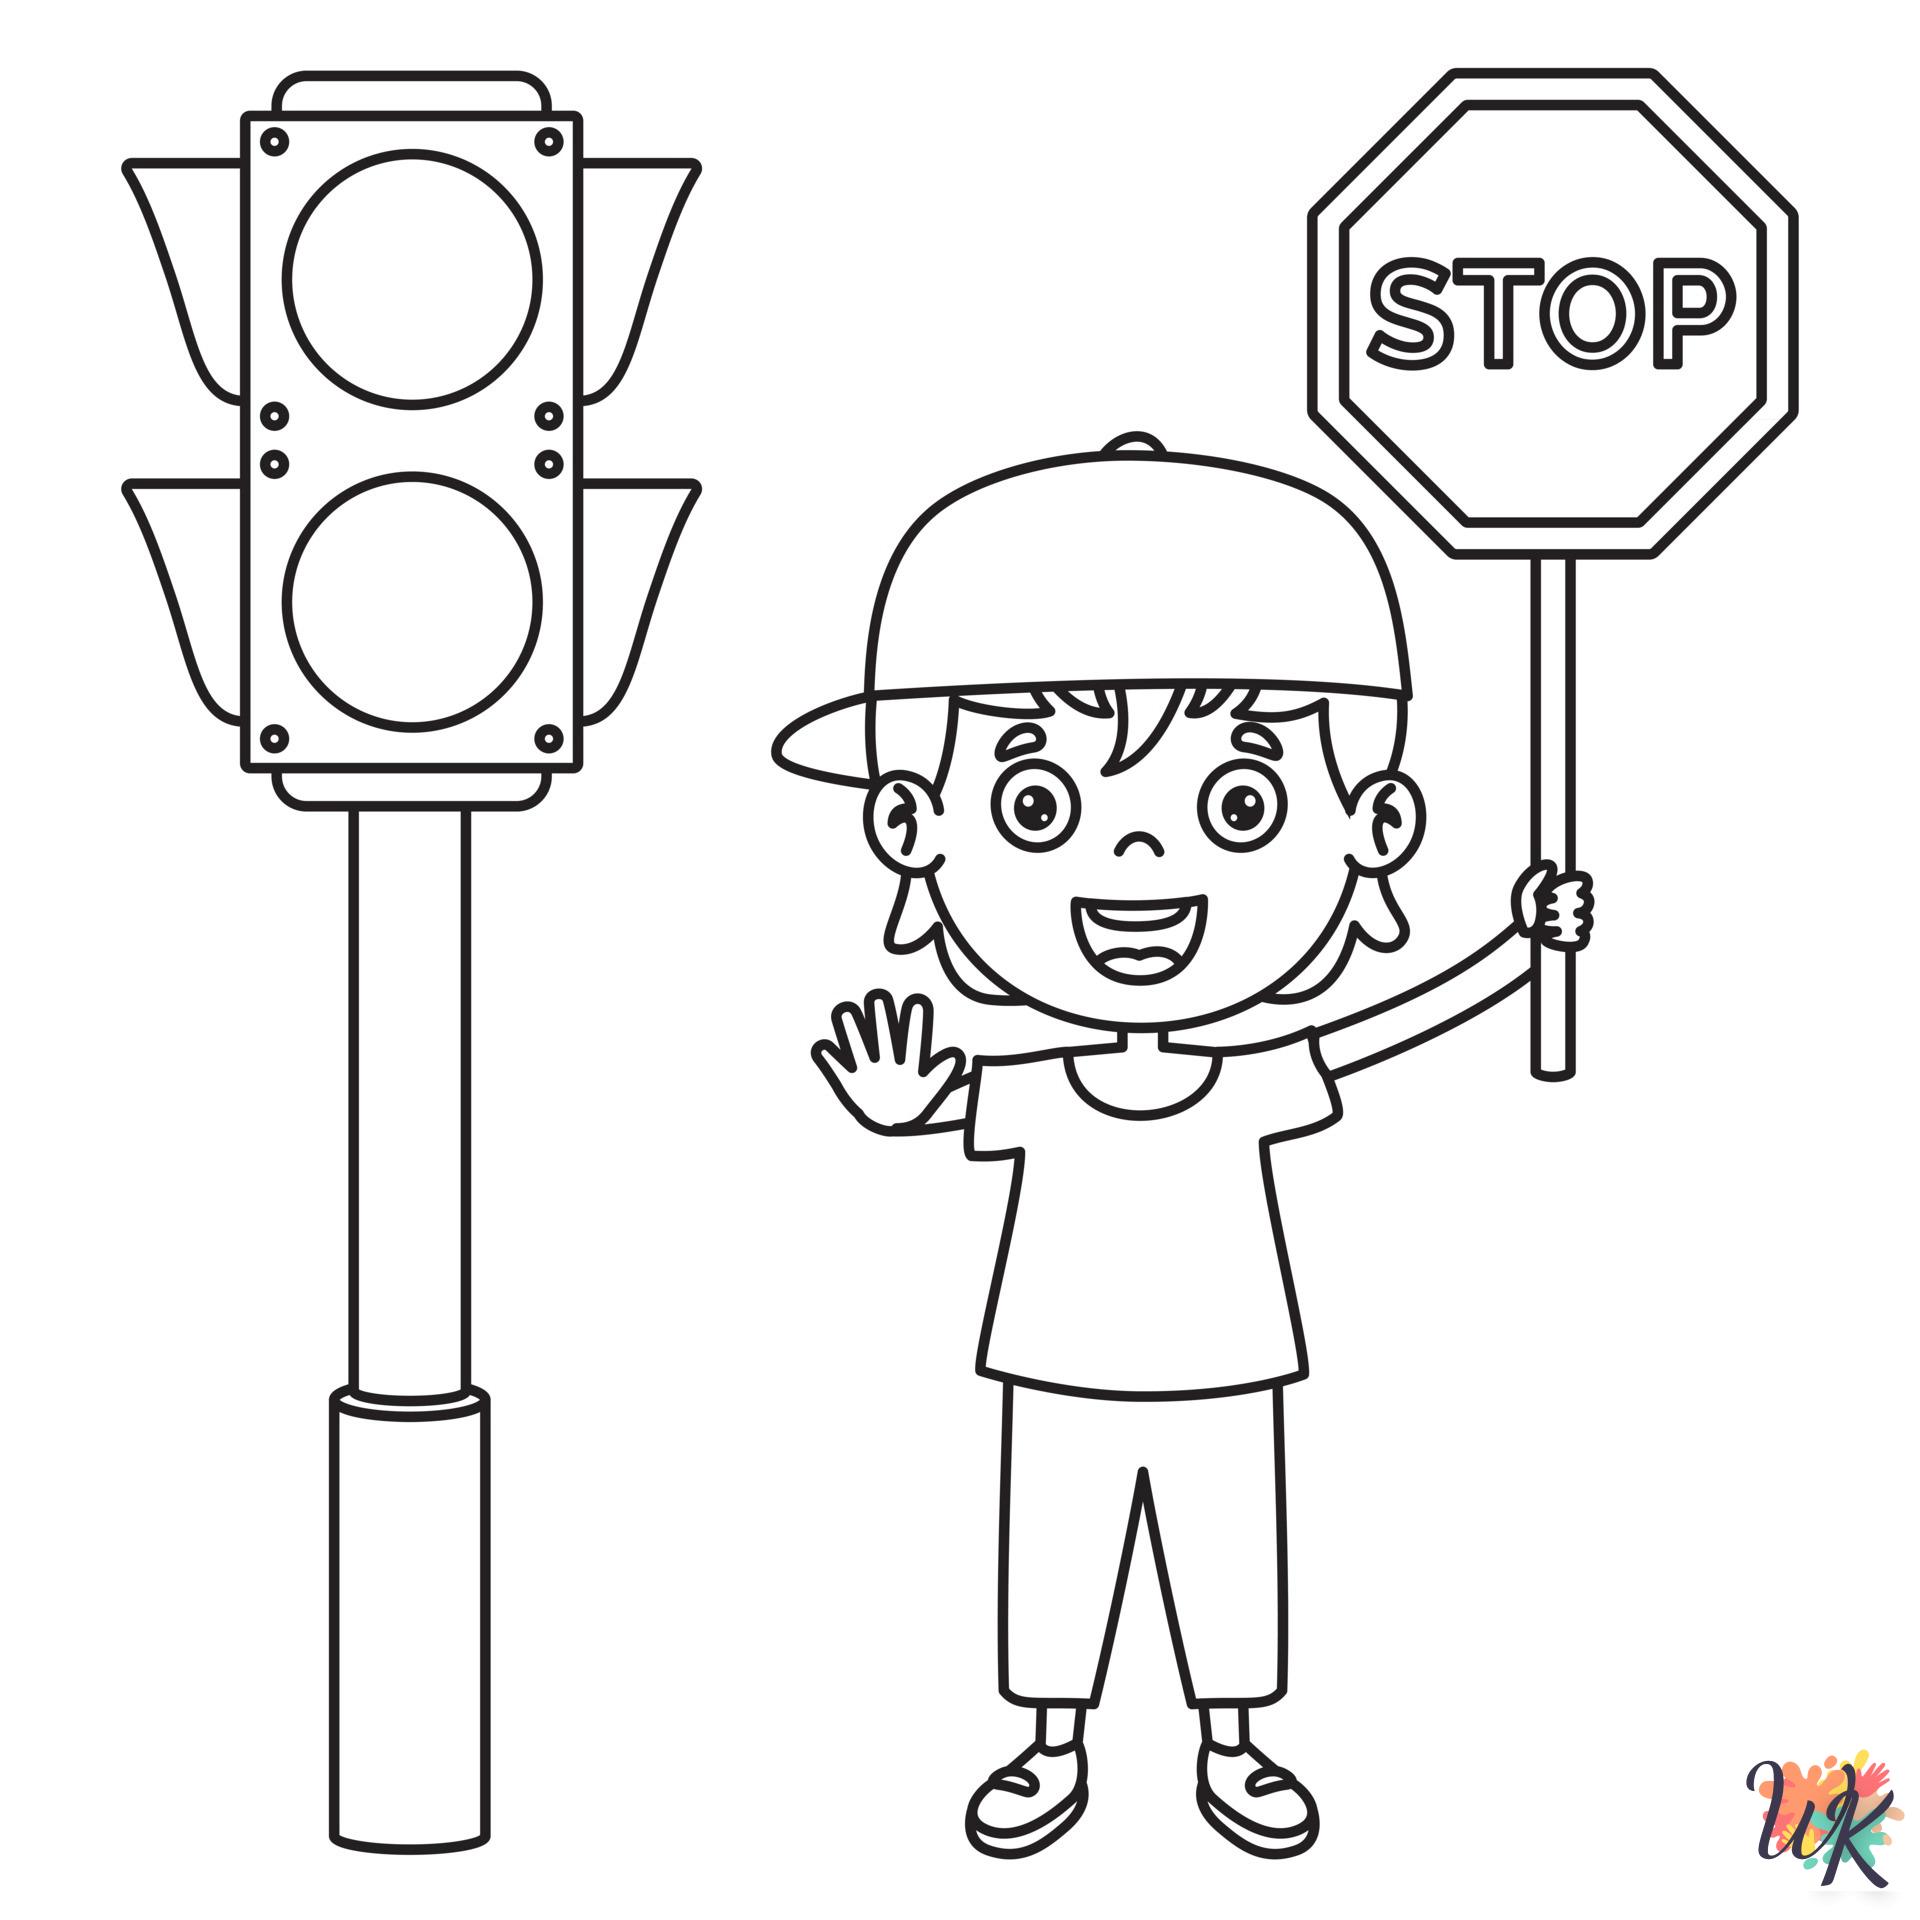 Traffic Light coloring pages for adults